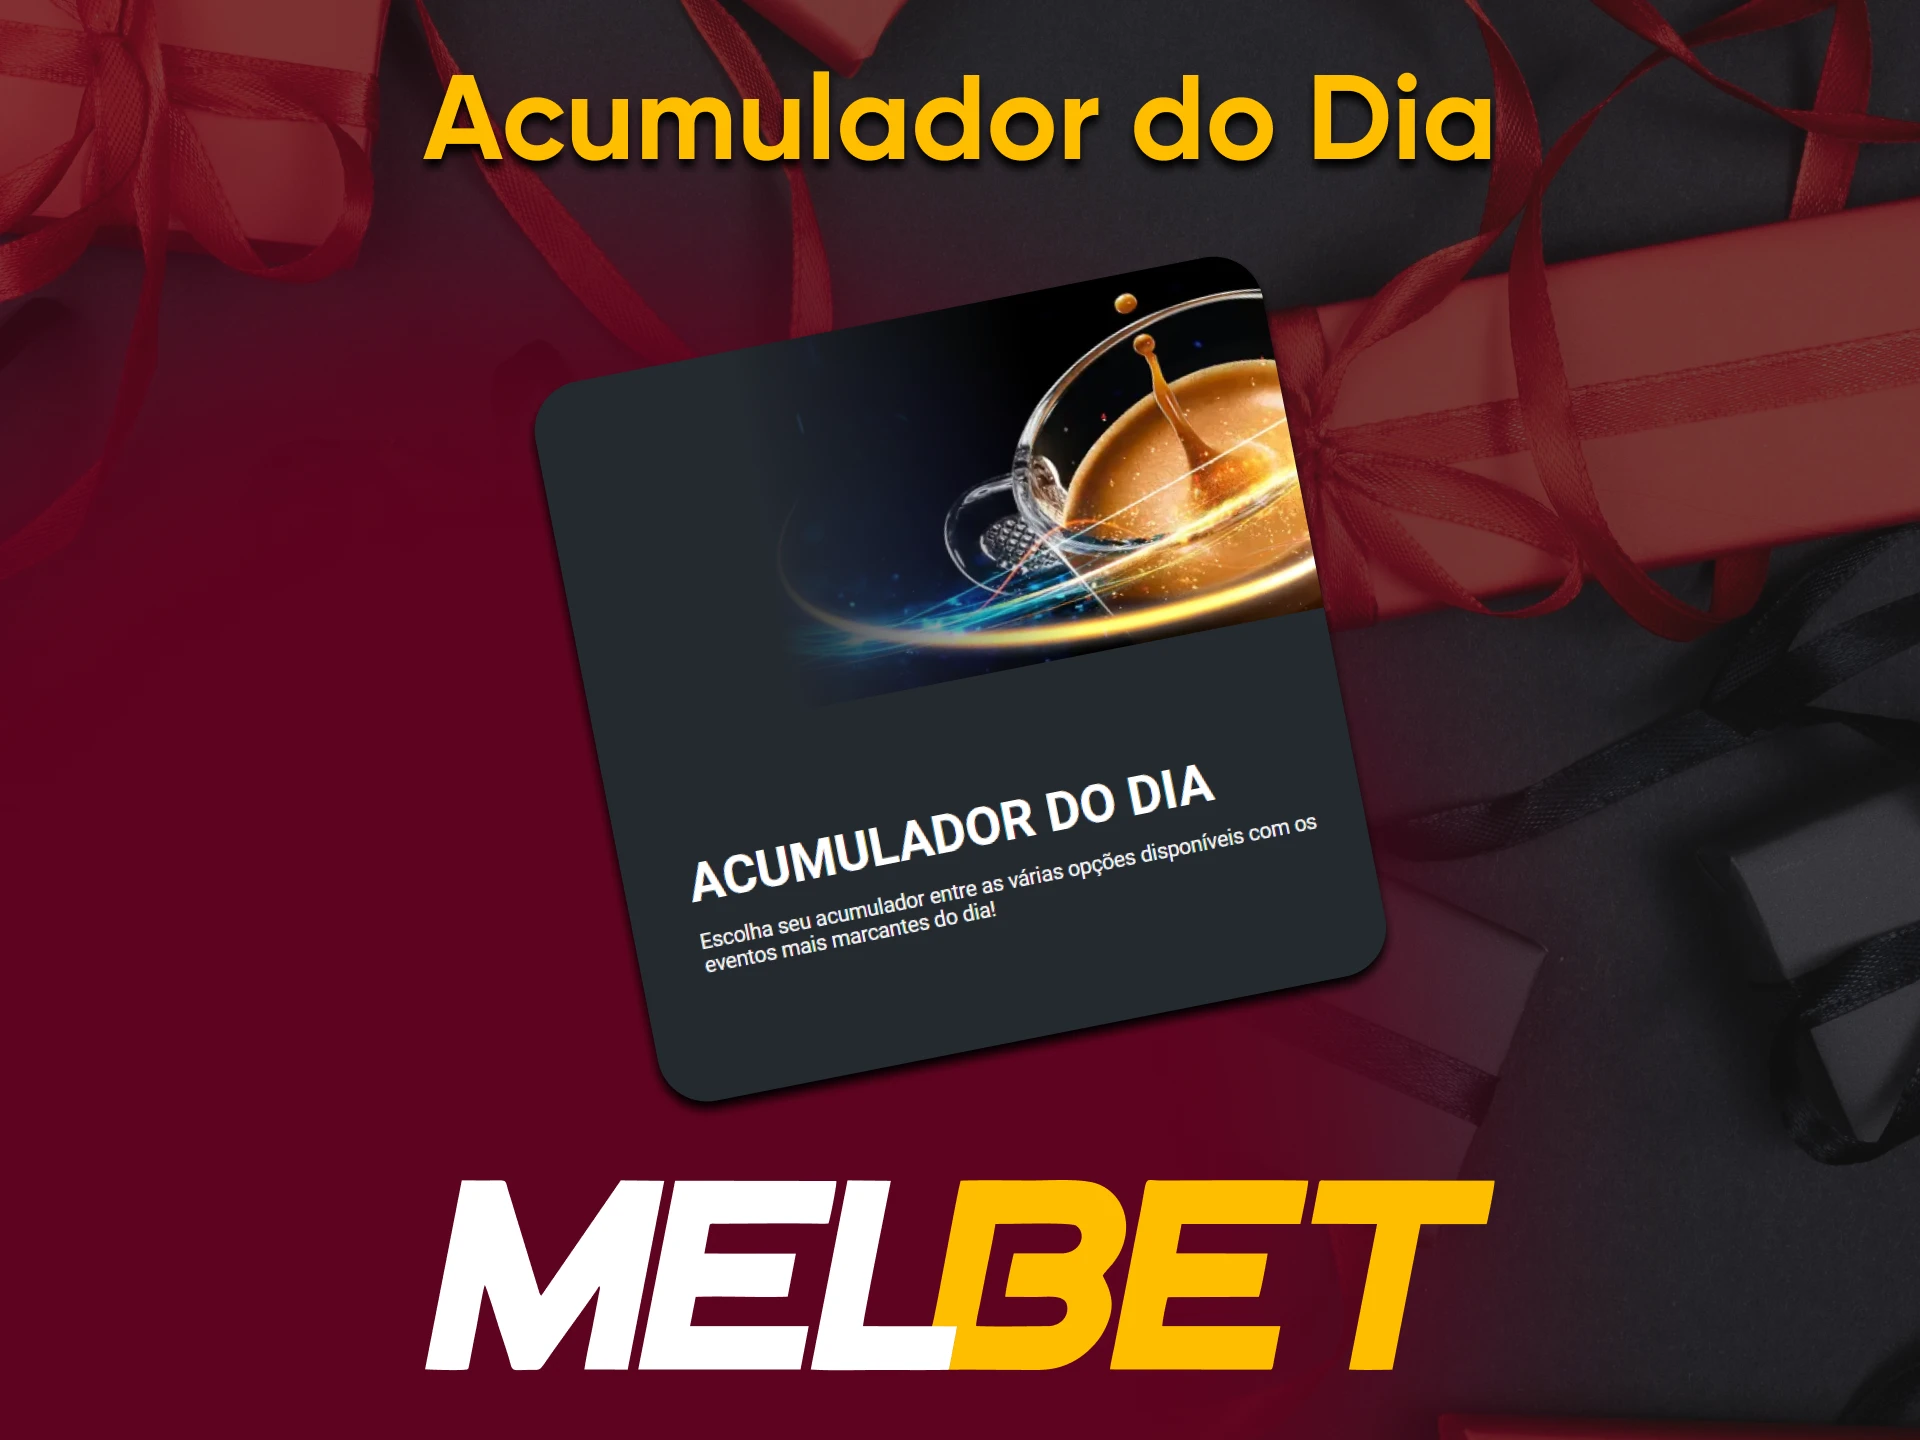 To get an additional Melbet bonus, place more bets.